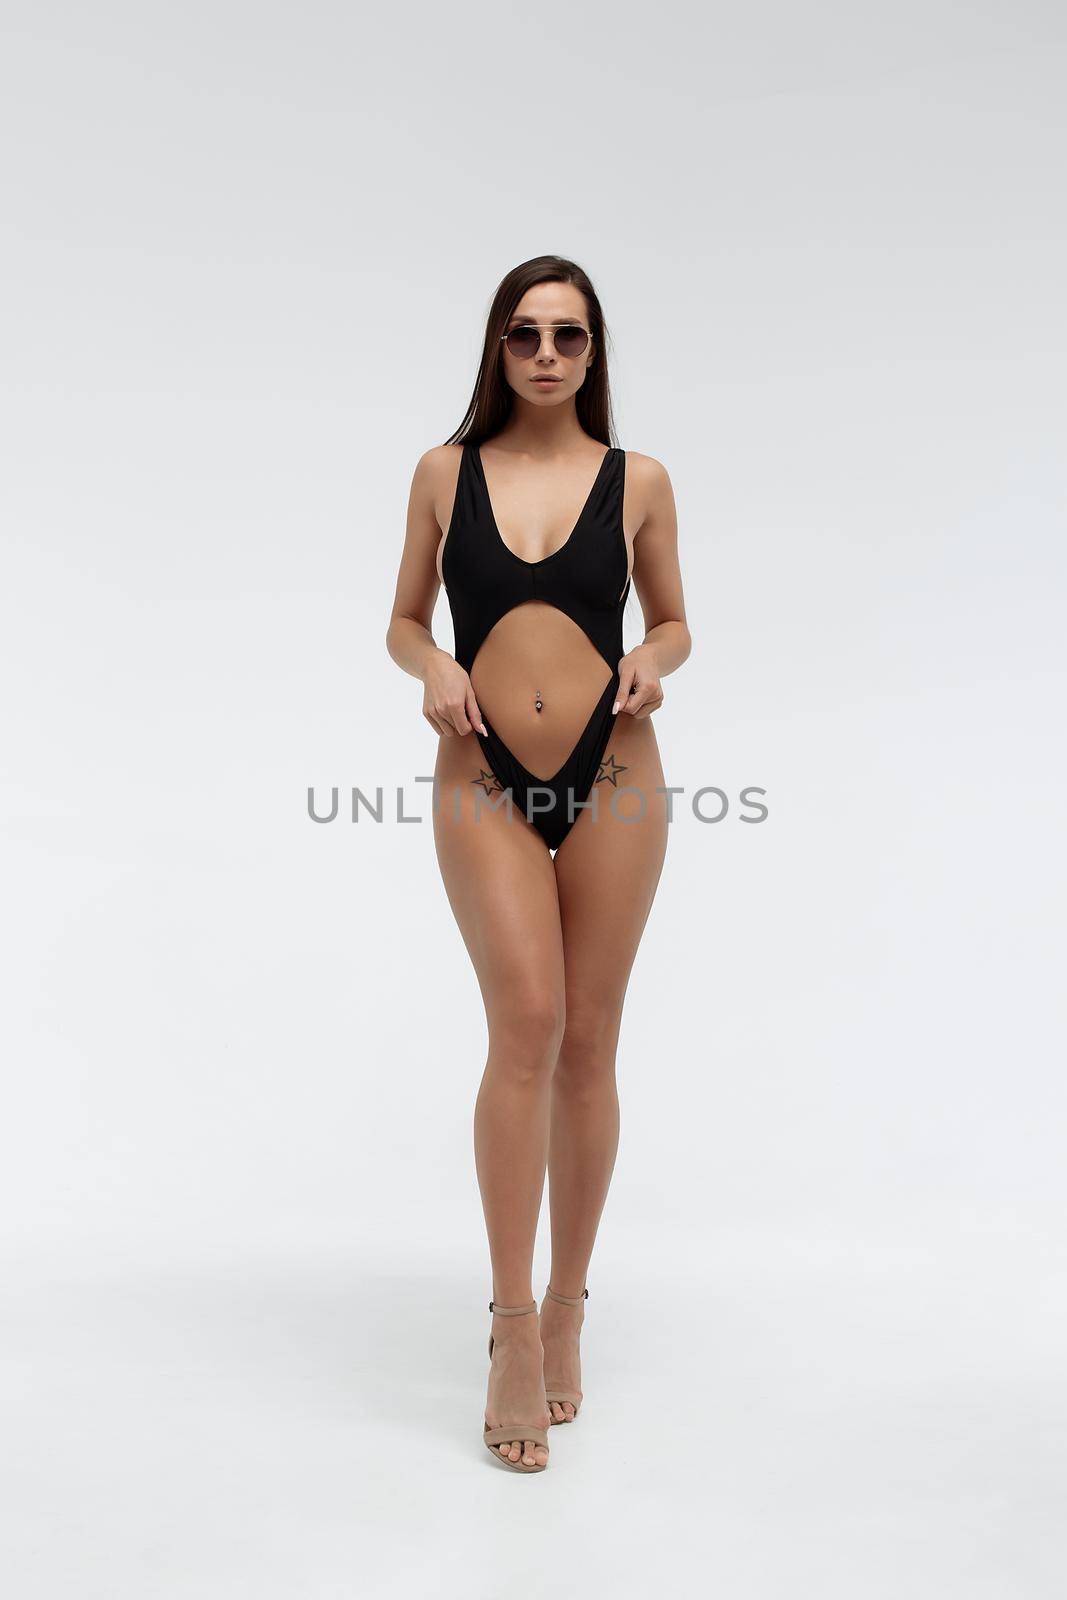 Attractive long haired young brunette model in sexy black bikini and trendy sunglasses touching hair while standing against white background